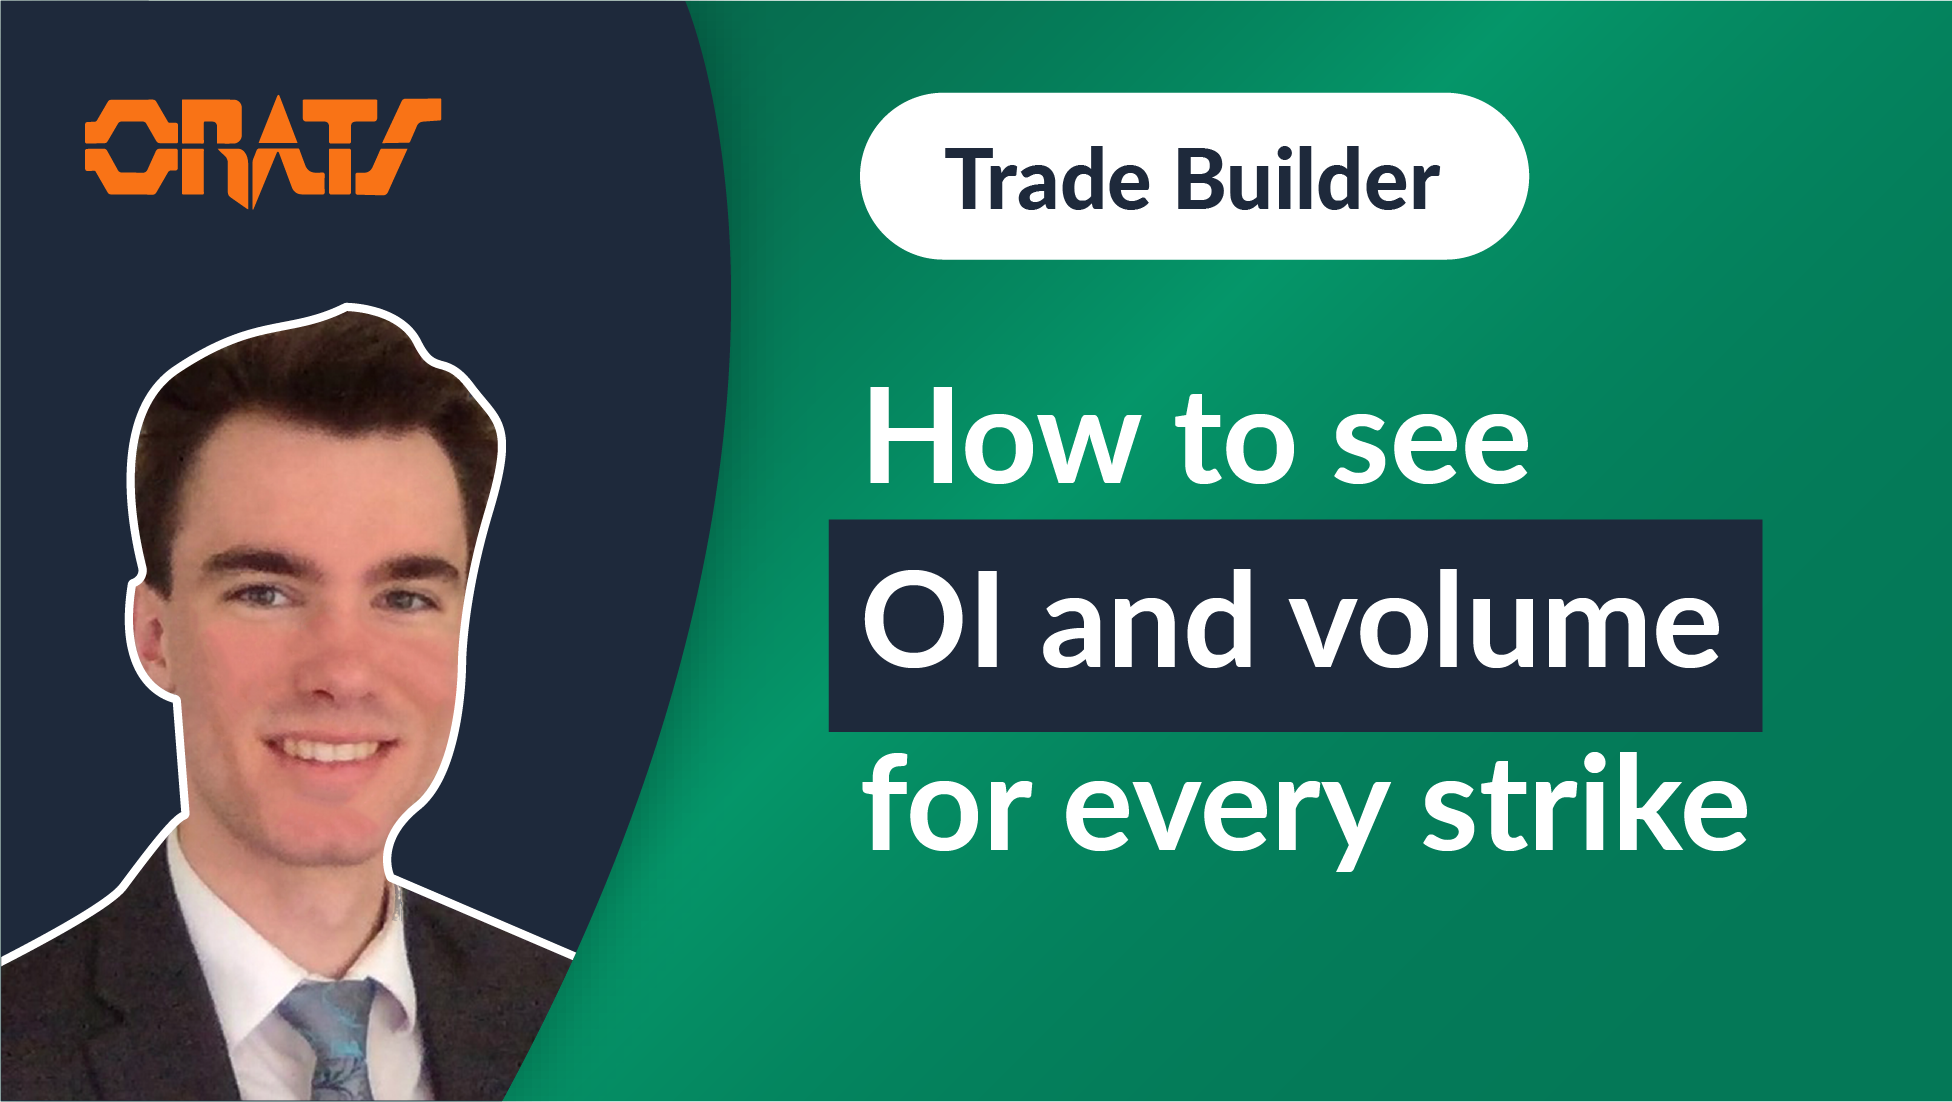 How to See Open Interest and Volume for Every Strike in the Trade Builder